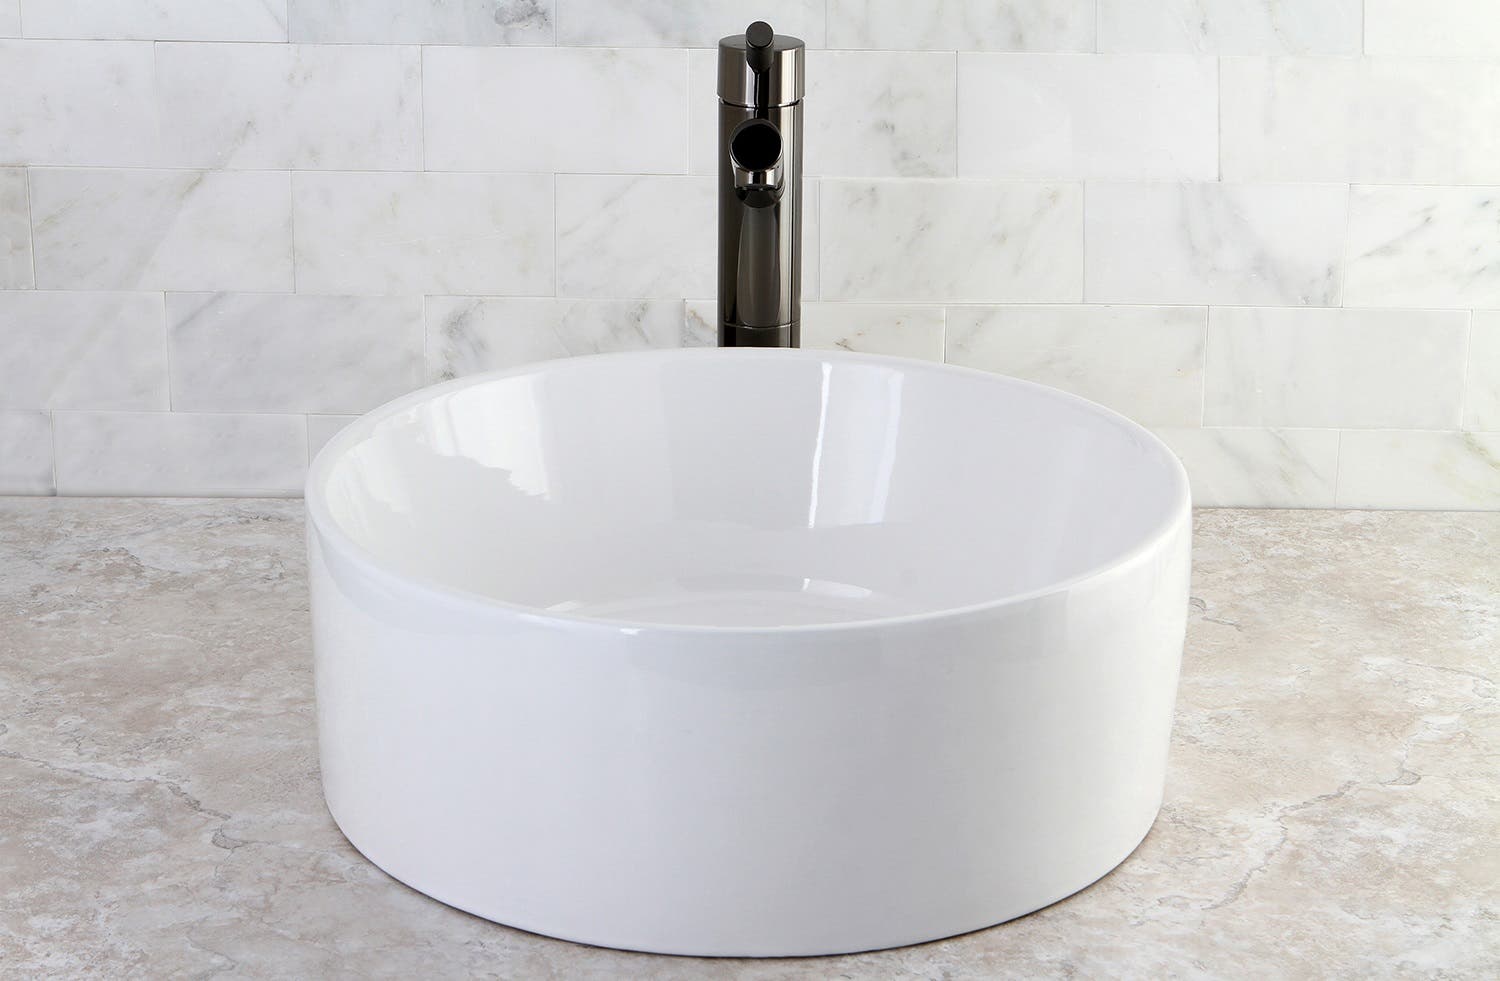 SINK FEATURE 1: Profile of the EV3103 Fauceture Vessel Sink